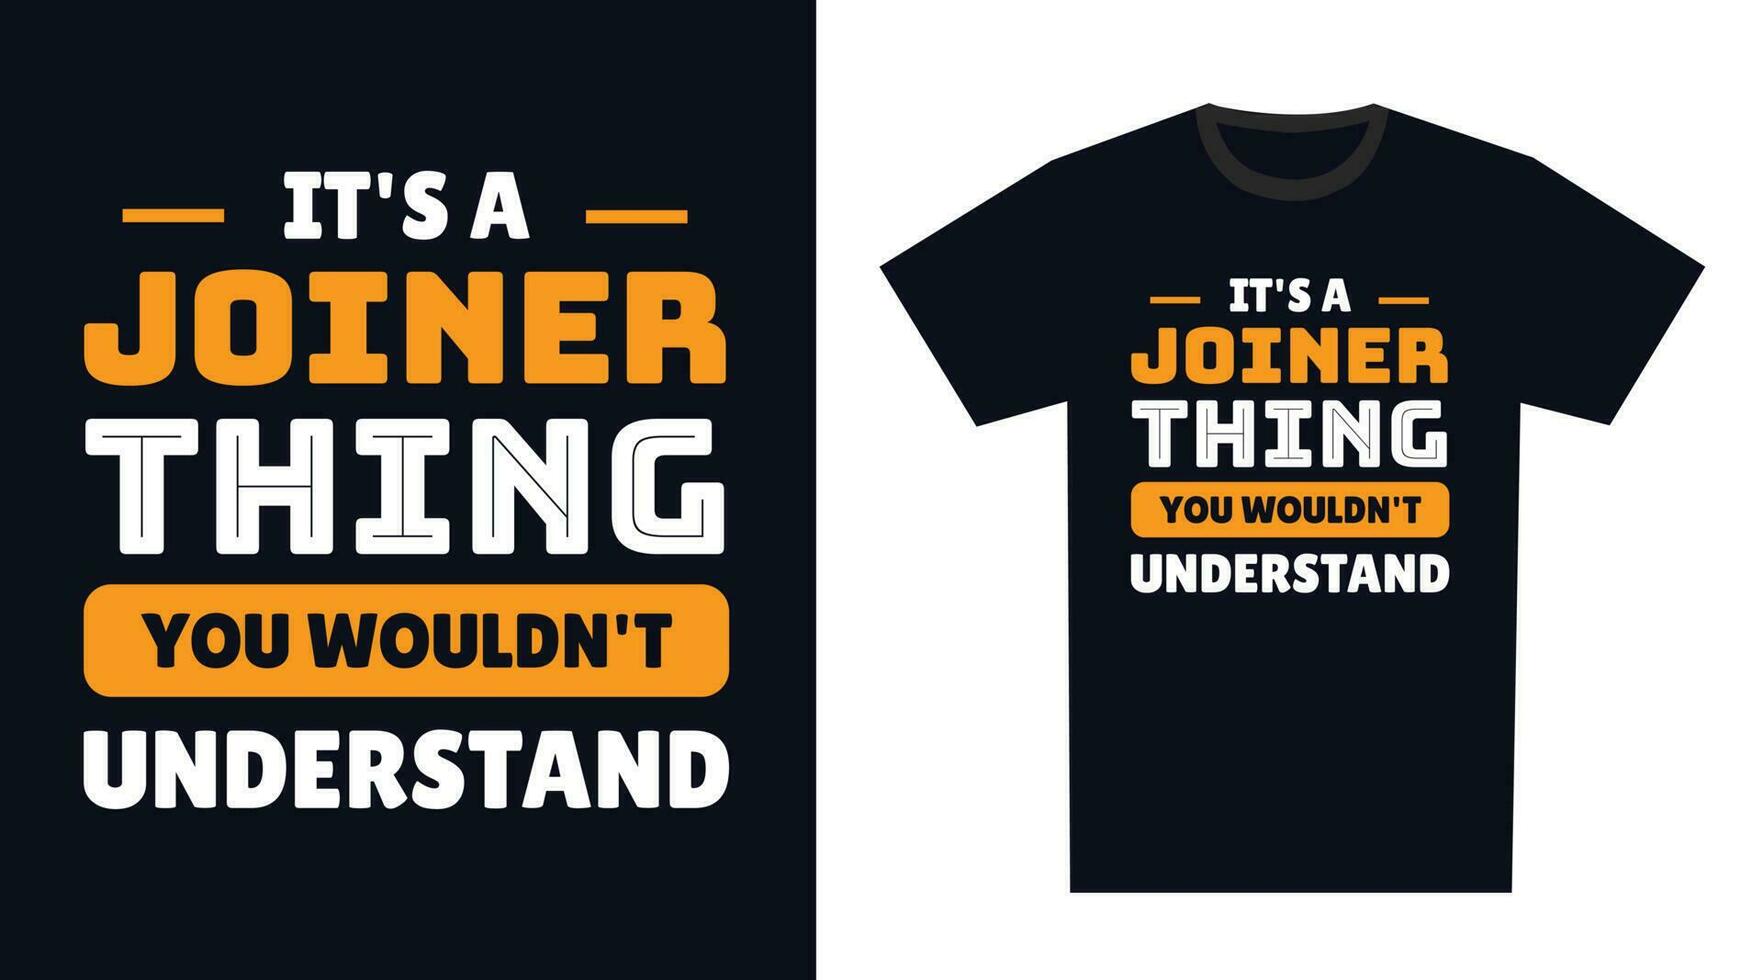 Joiner T Shirt Design. It's a Joiner Thing, You Wouldn't Understand vector